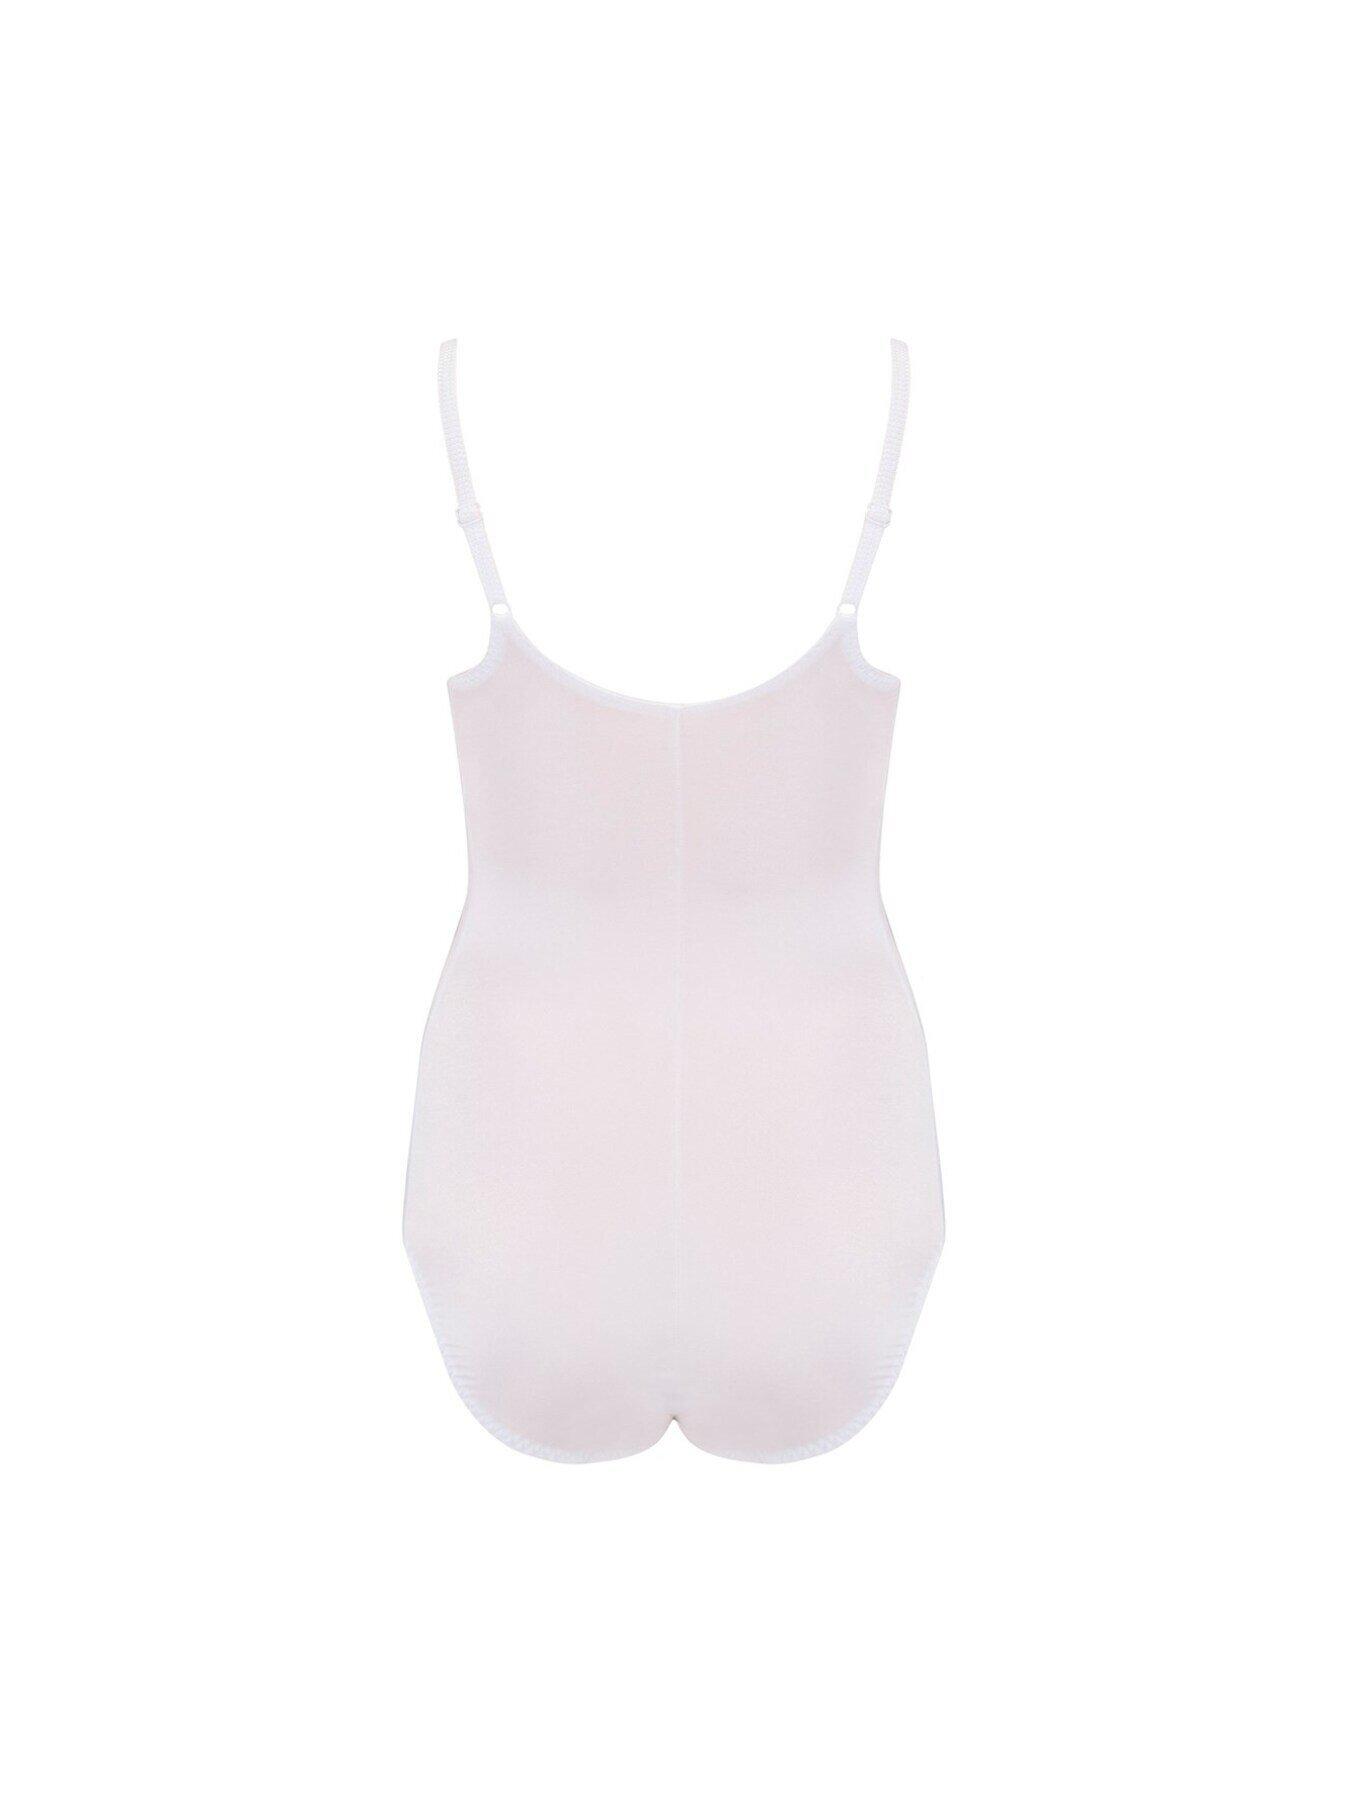 CHARNOS SUPERFIT FULL CUP BODYSHAPER -WHITE